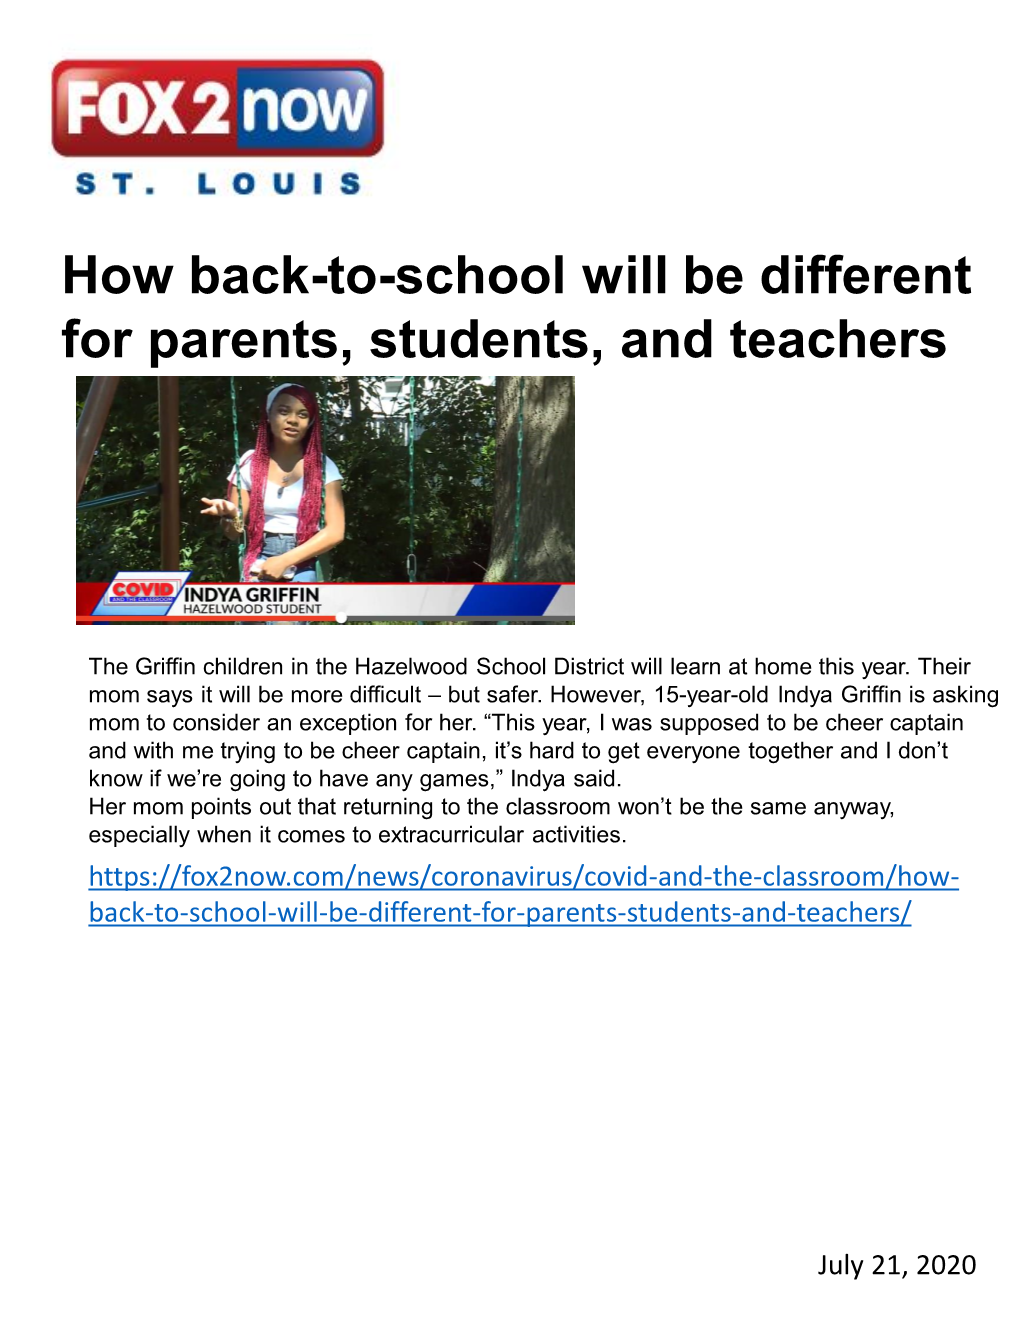 How Back-To-School Will Be Different for Parents, Students, and Teachers